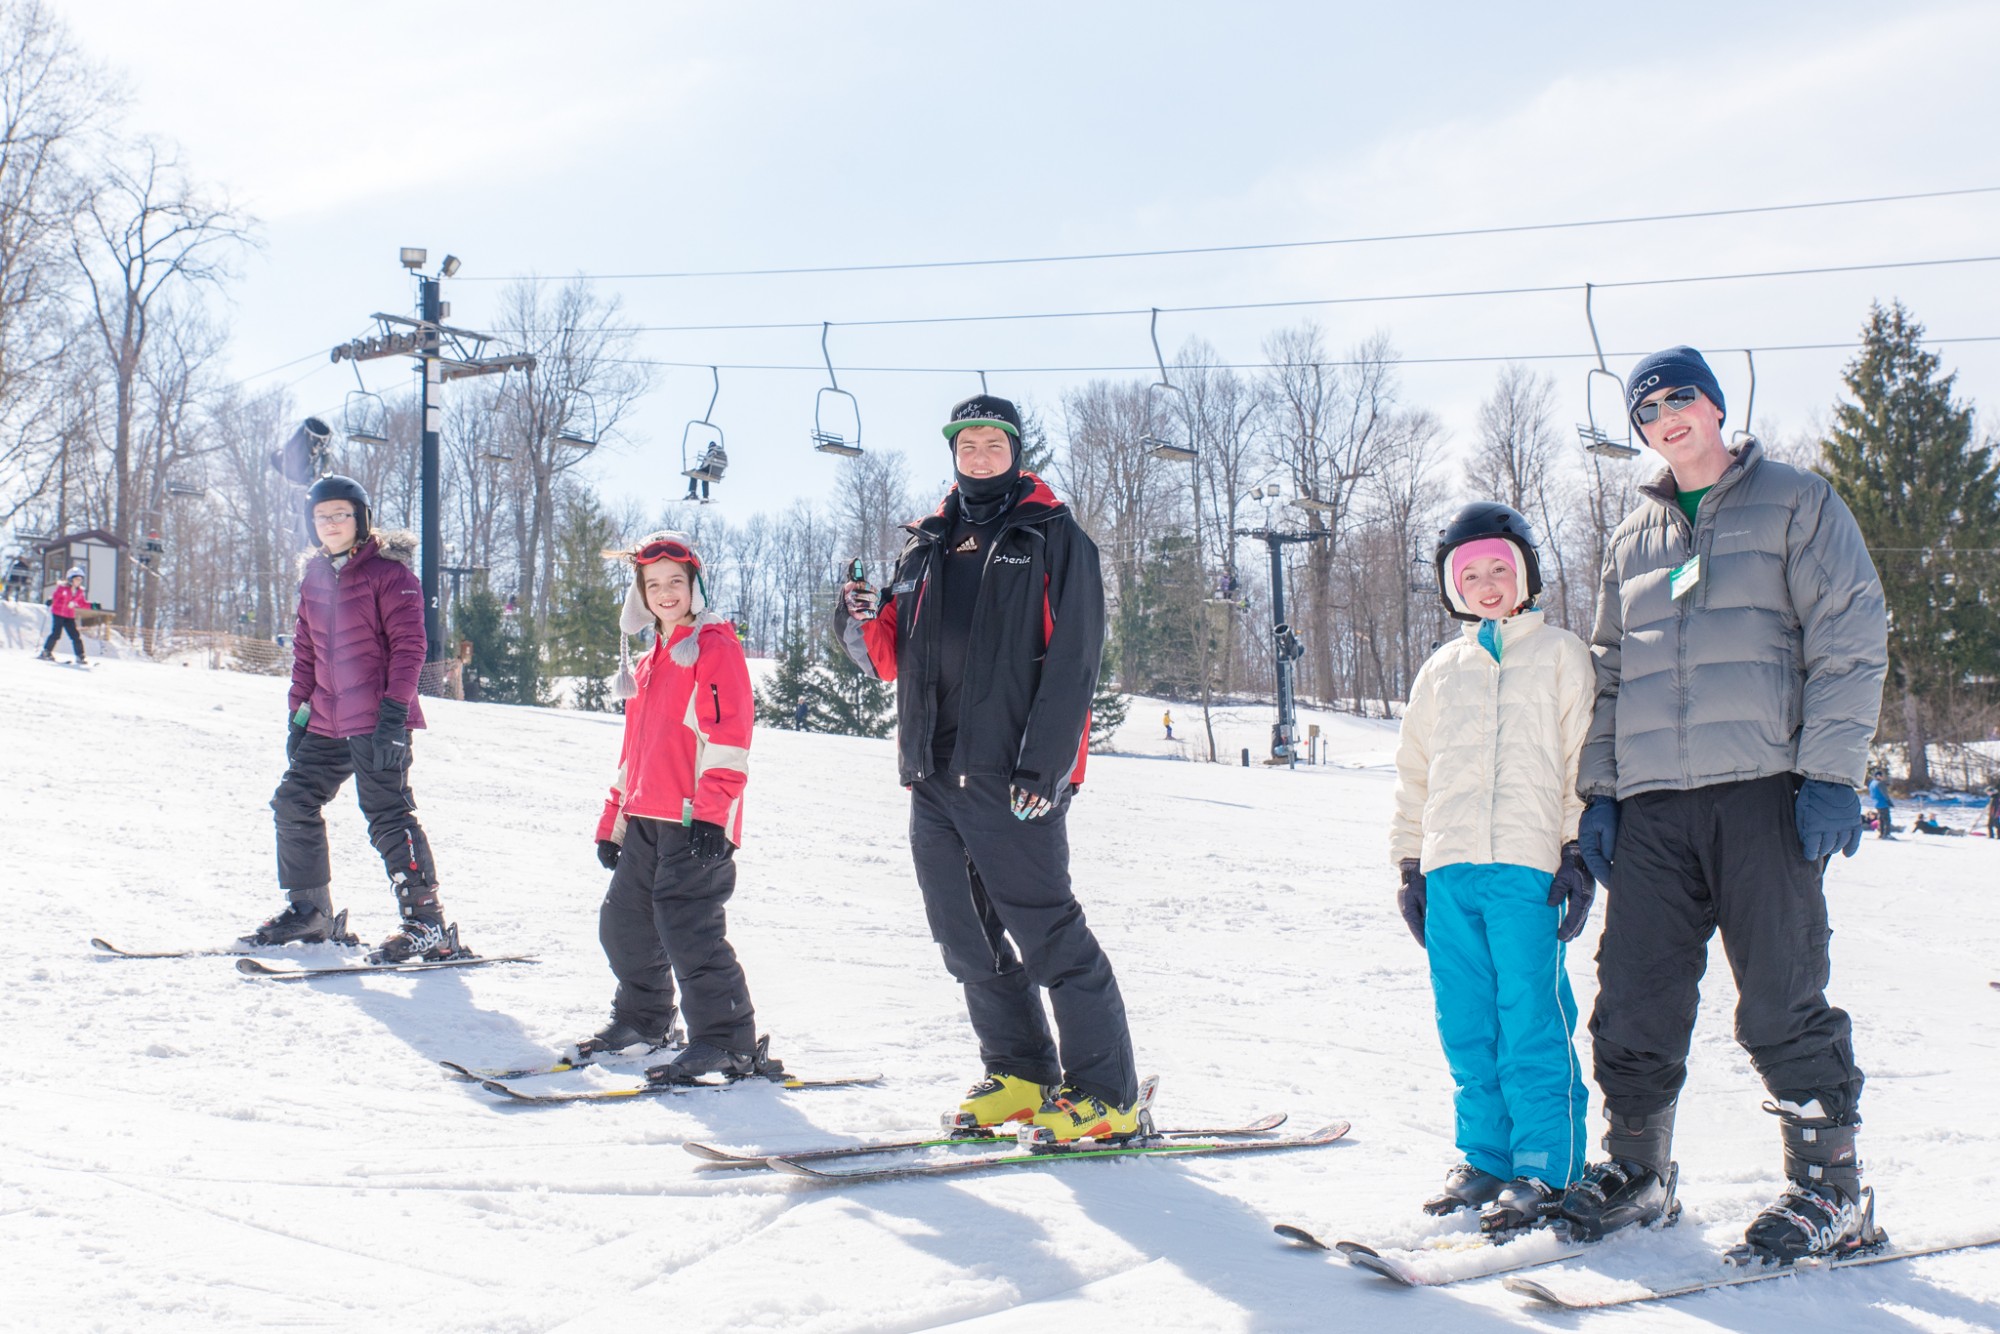 Snow Trails Celebrates Learn to Ski & Snowboard Month  With Special Beginner Packages and Programs for Kids